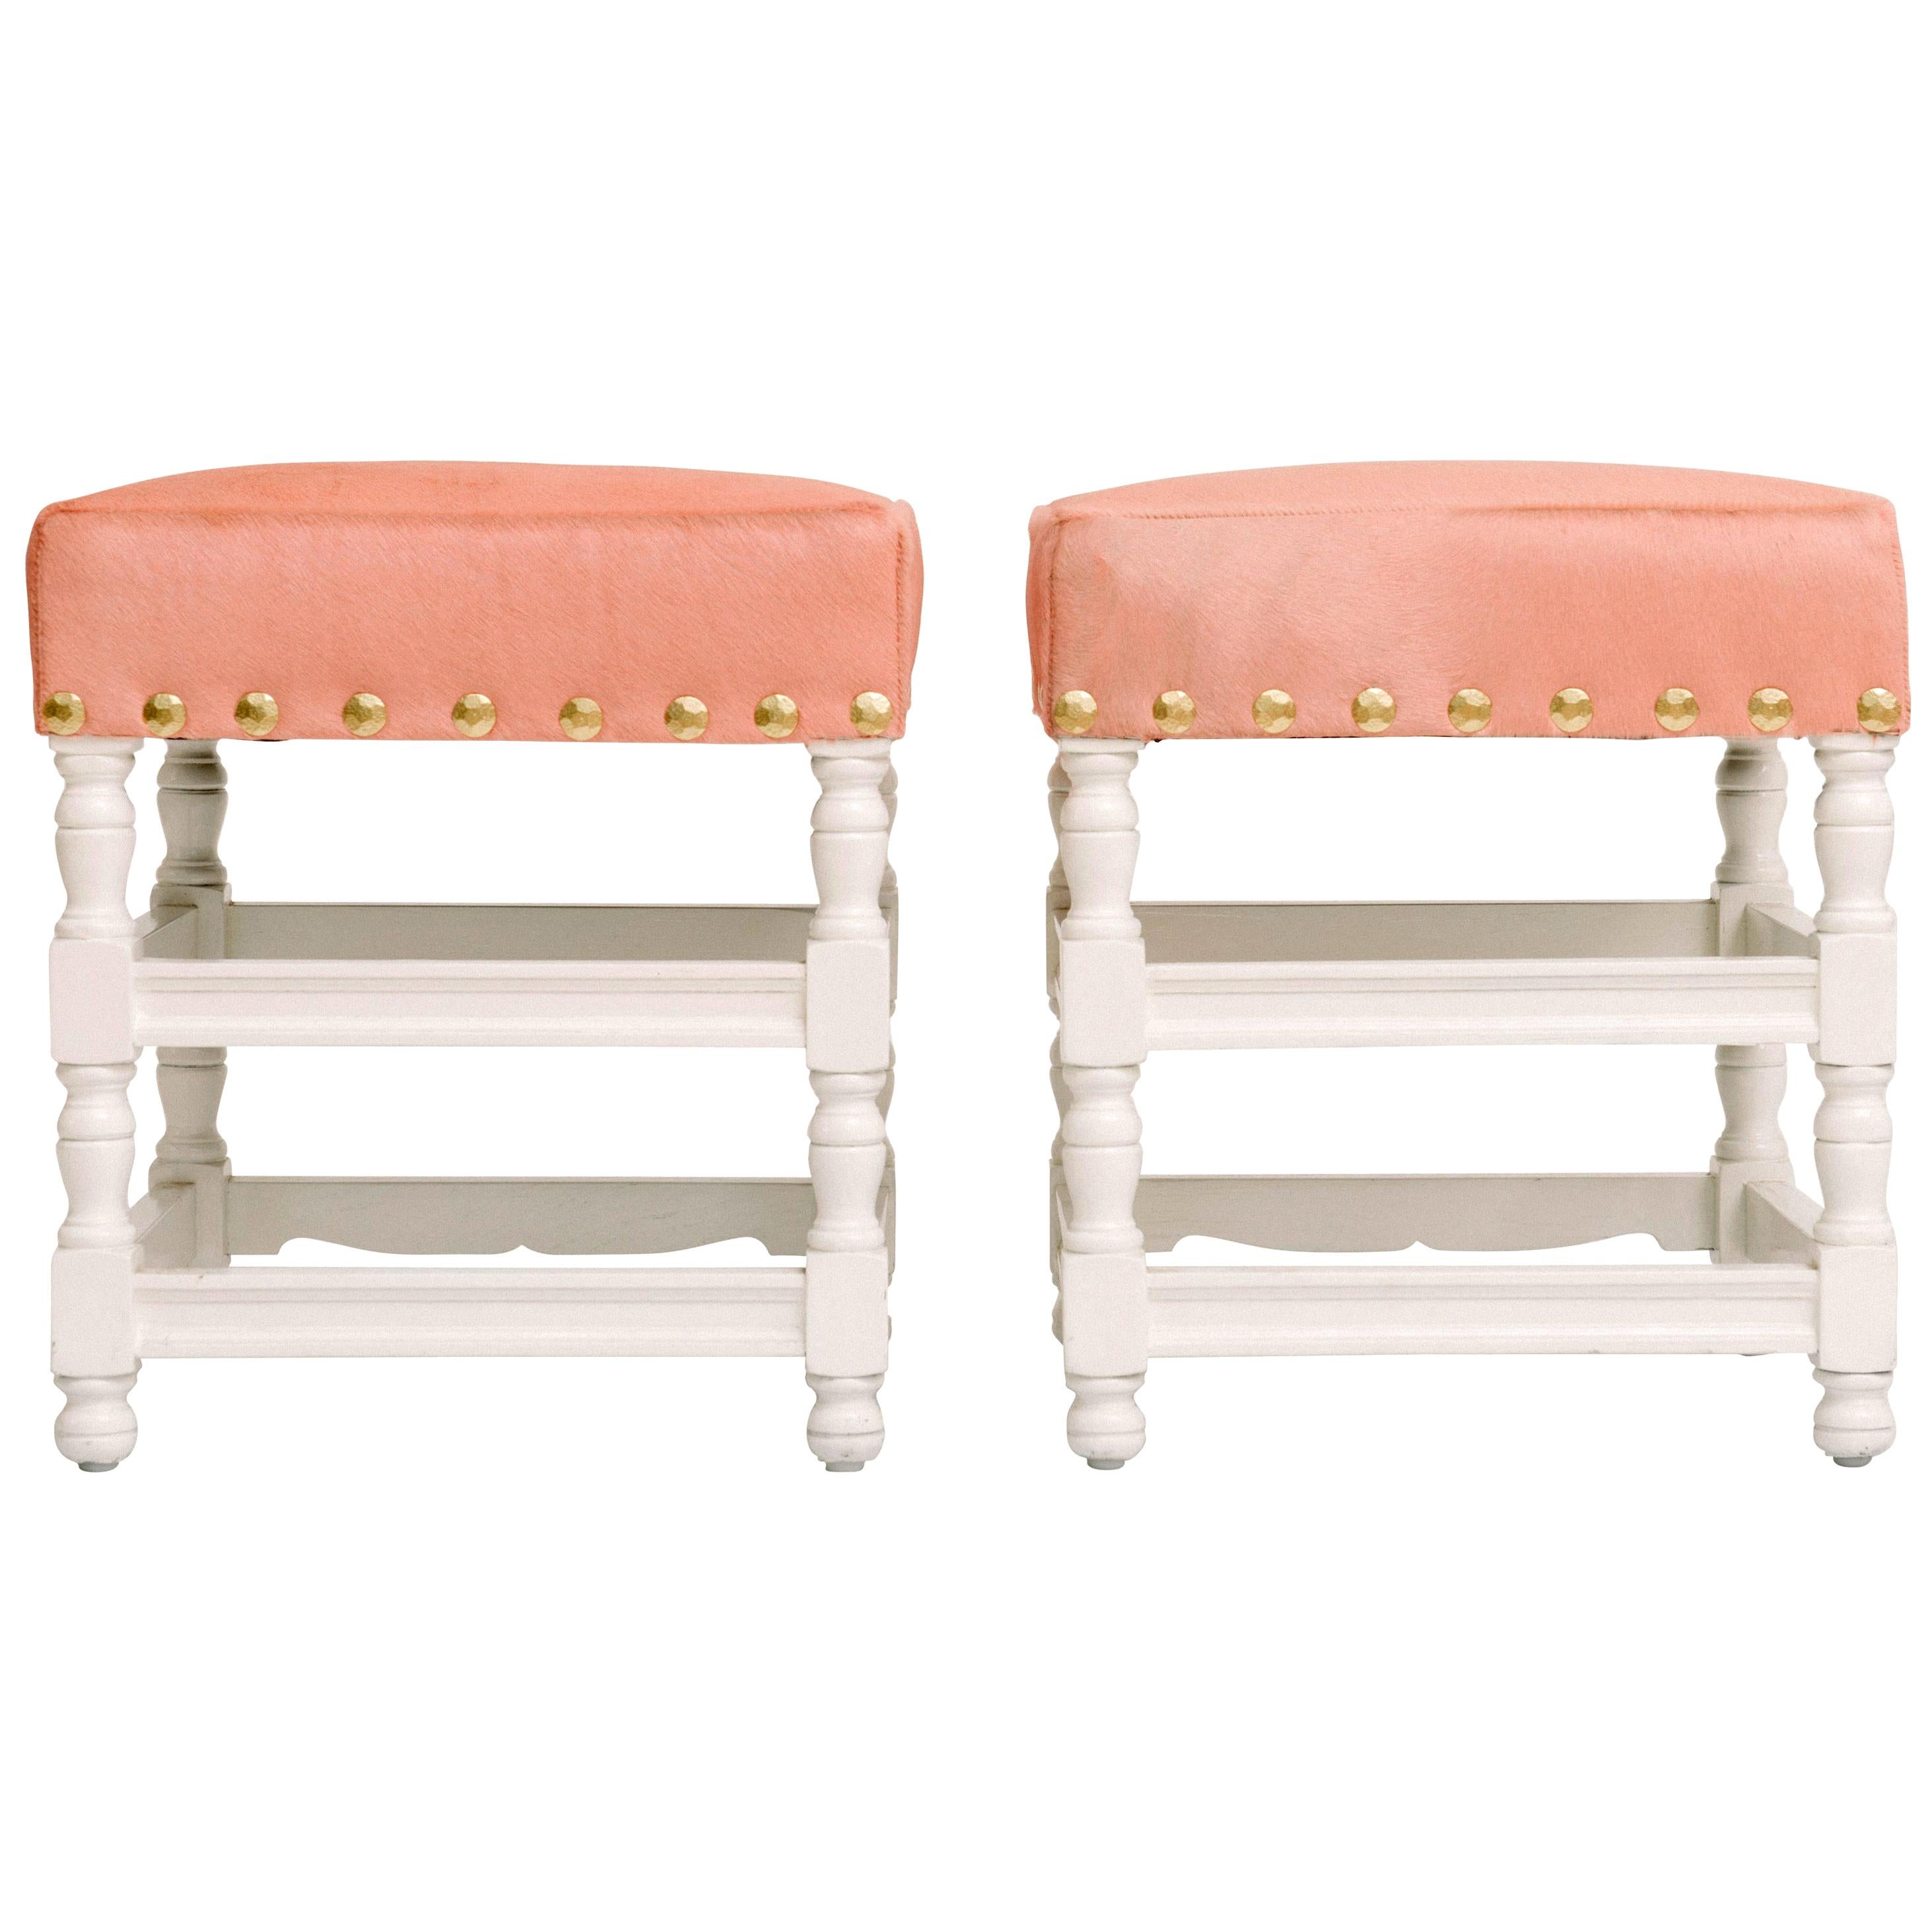 Pair of Custom White Lacquer Stools Upholstered in Pink Hide